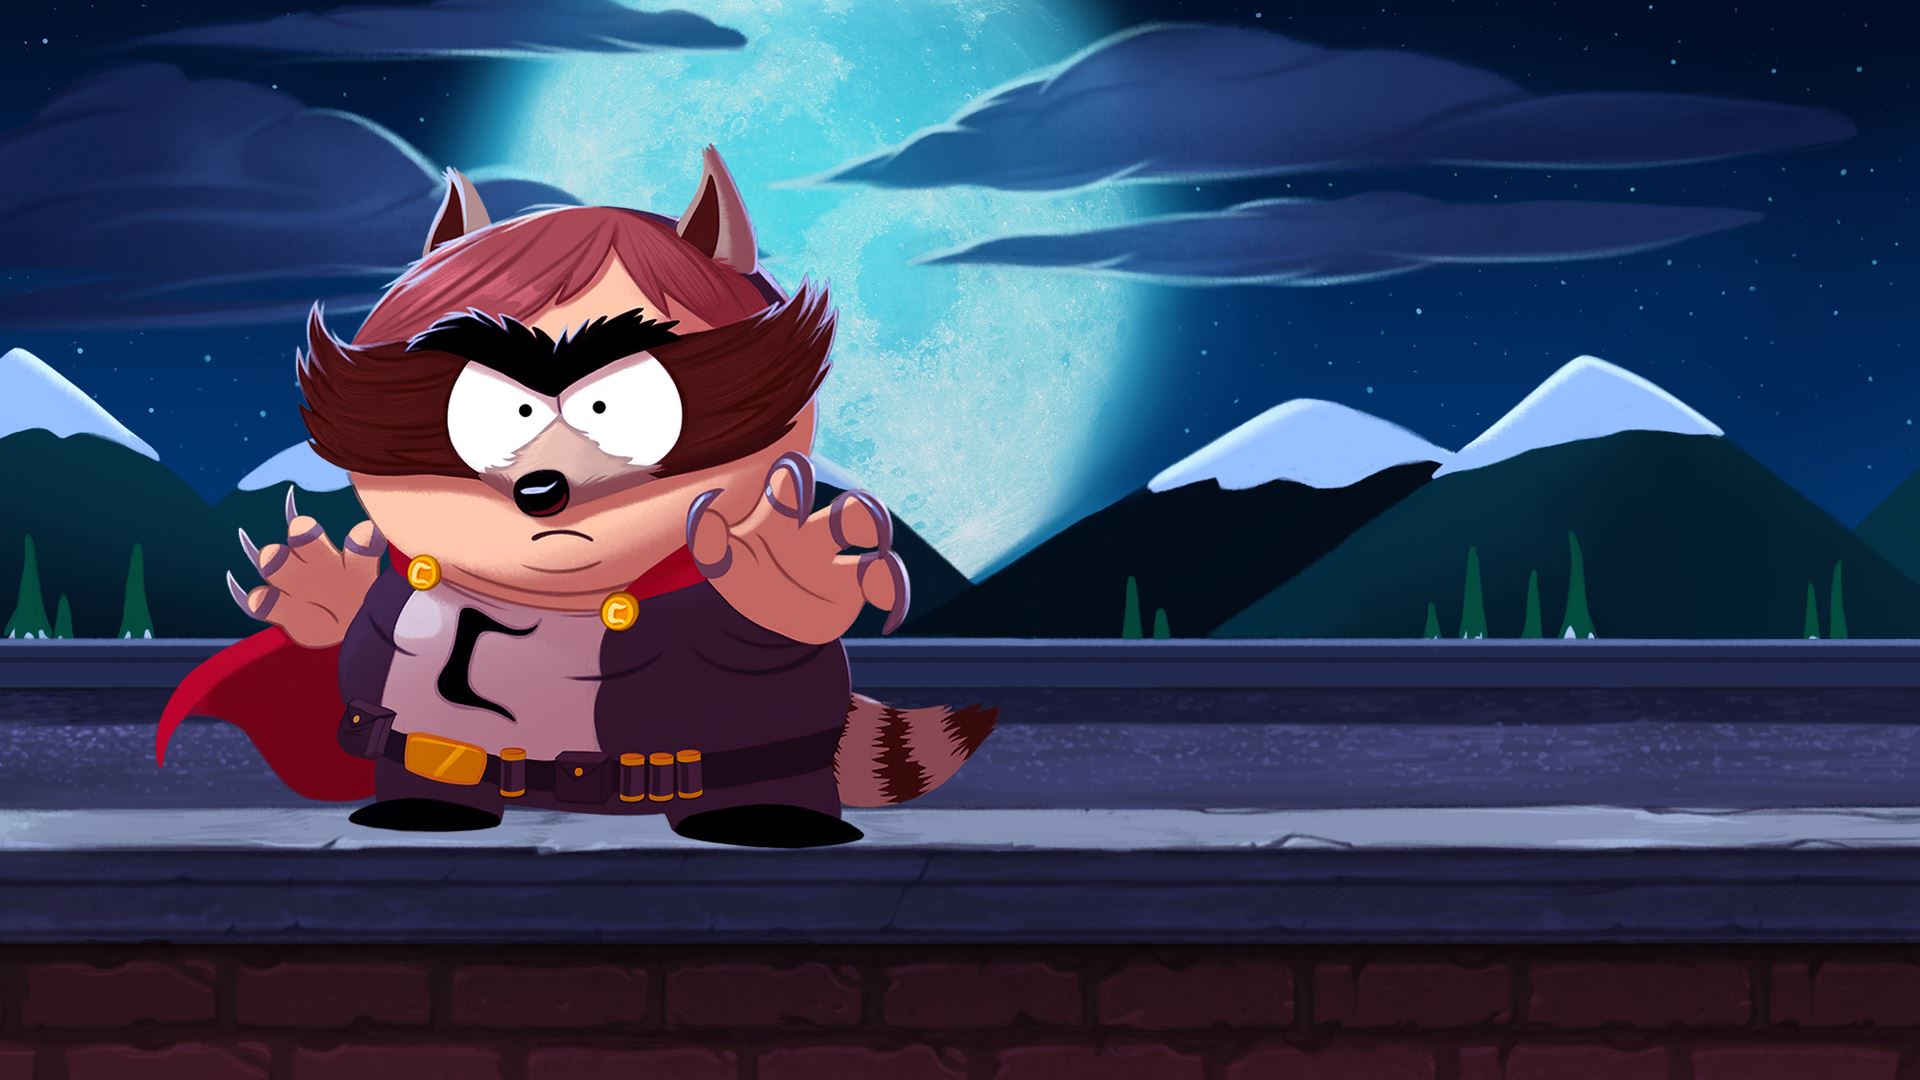 gaming superheroes Not DC or Marvel - The Coon (South Park: Fractured But Whole)